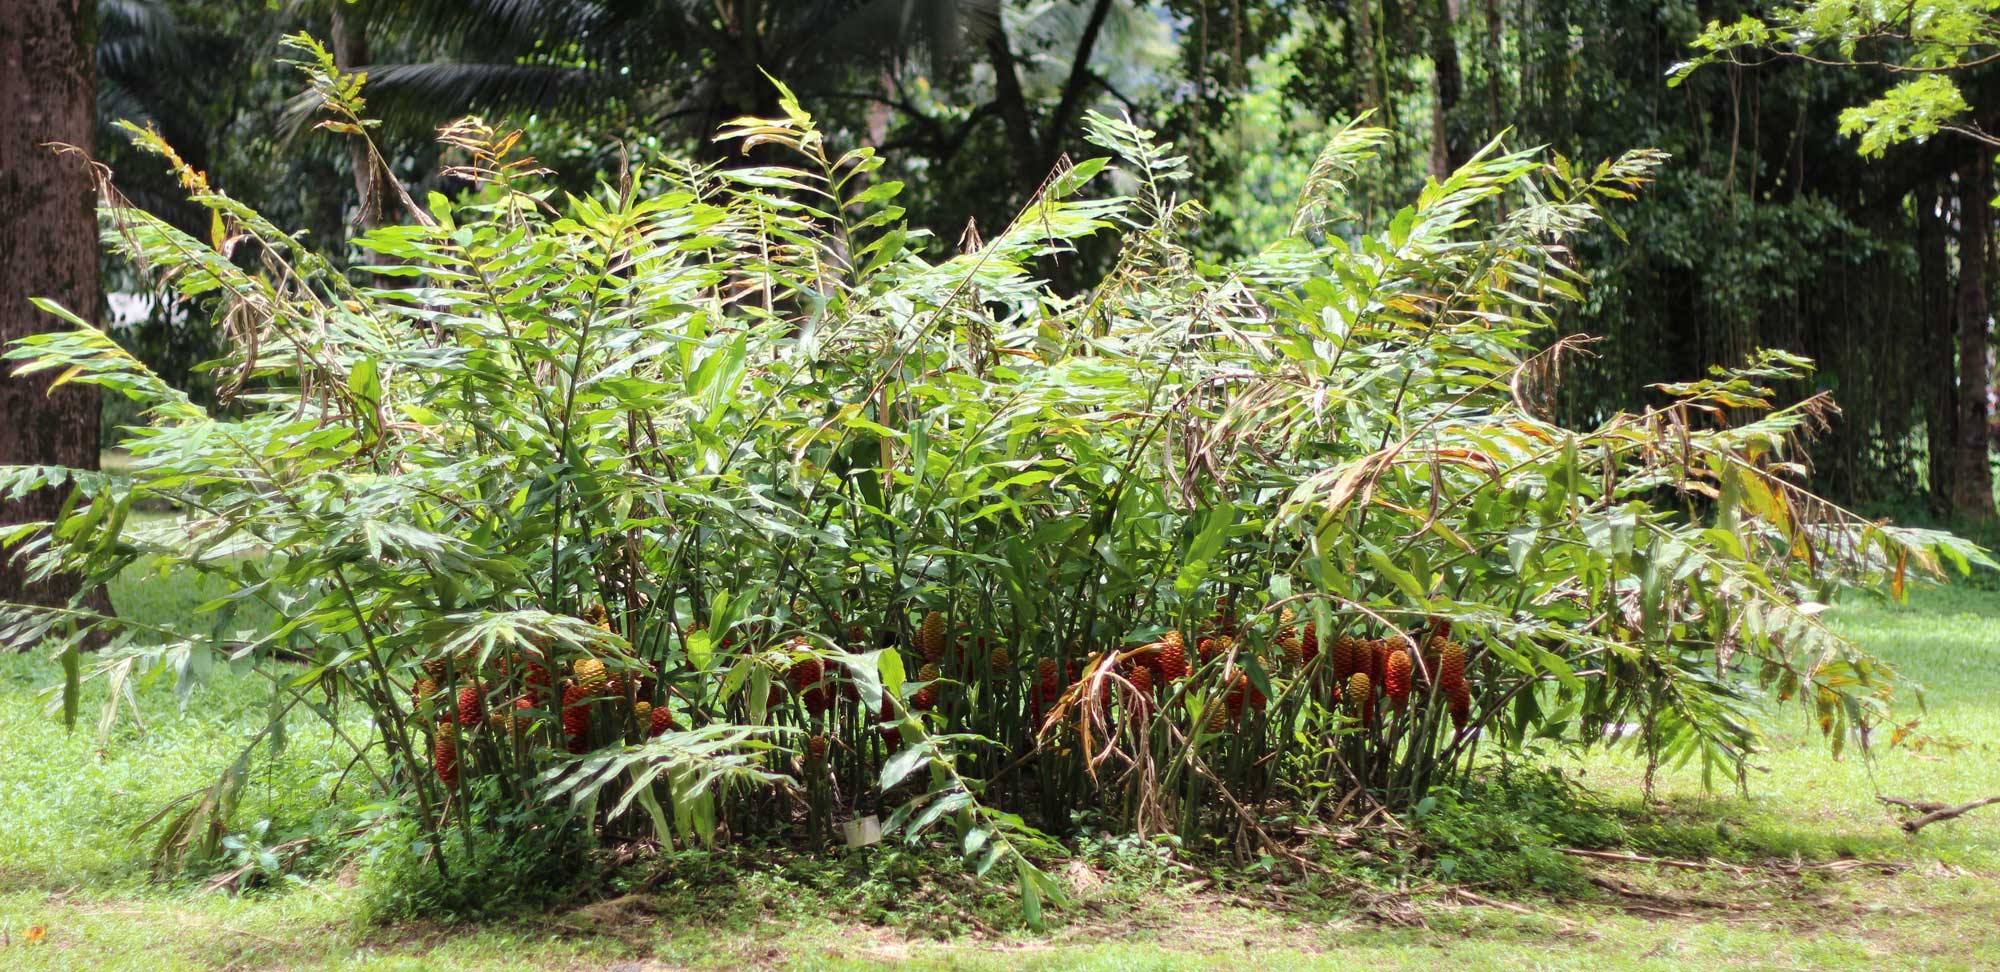 Photograph of a group of herbaceous monocots growing in a clump. The plants have pinnately compound leaves are red and yellow inflorescences. The inflorescences appear cone-like.